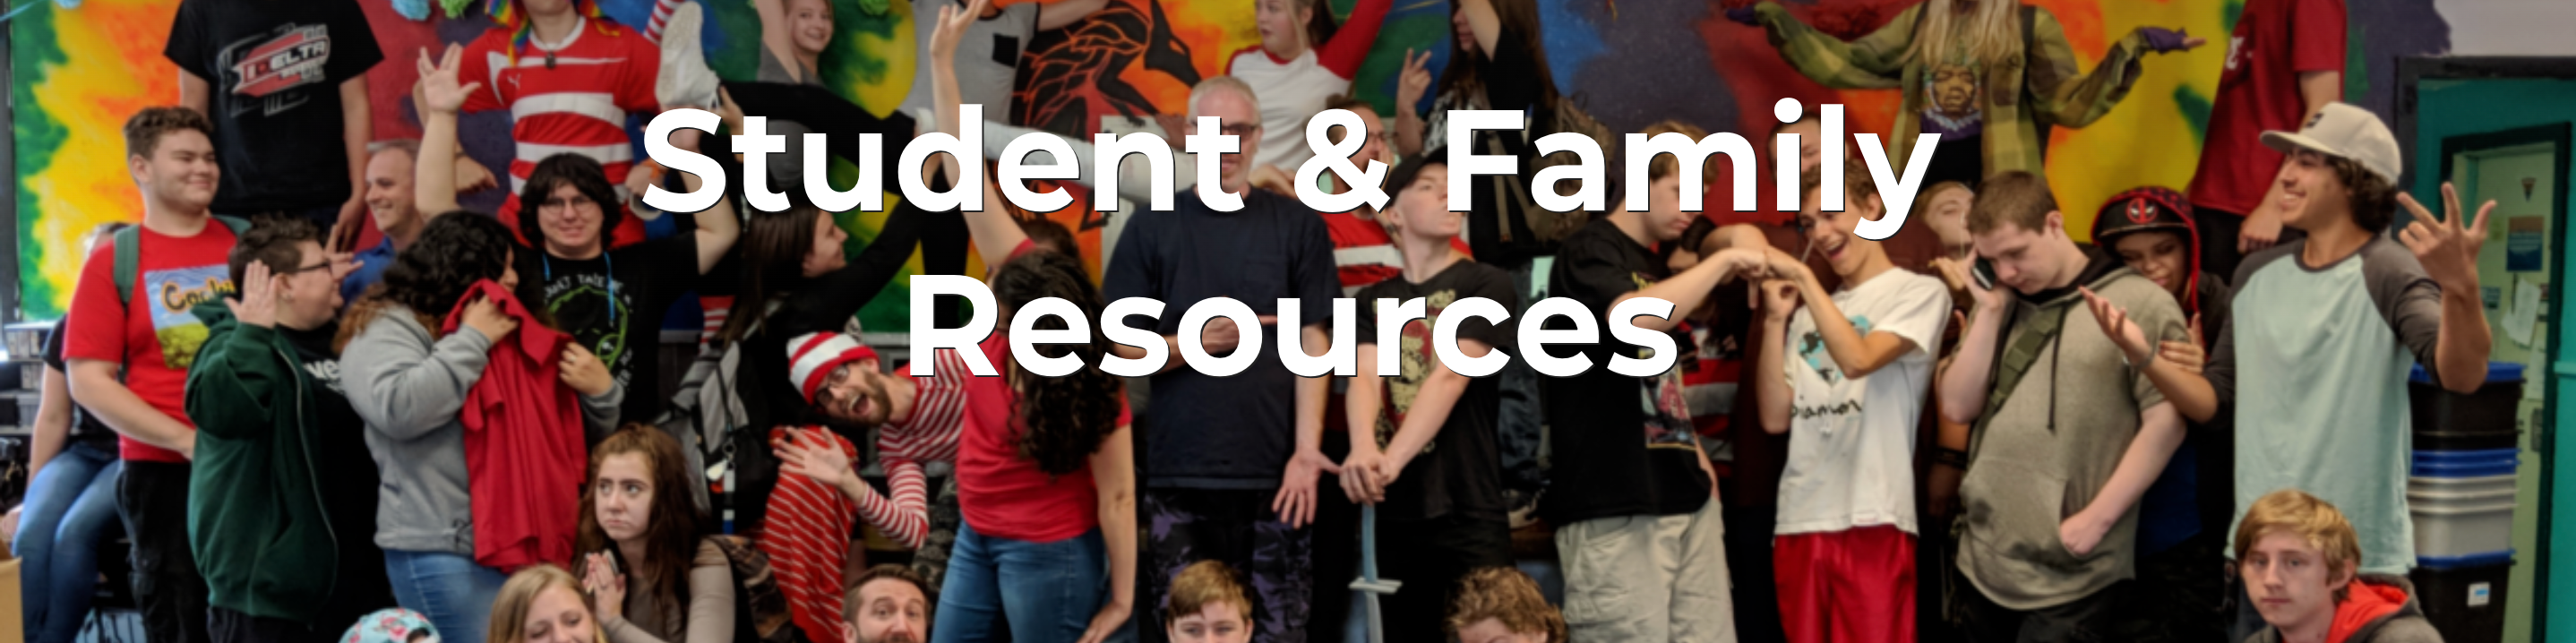 Student & Family Resources